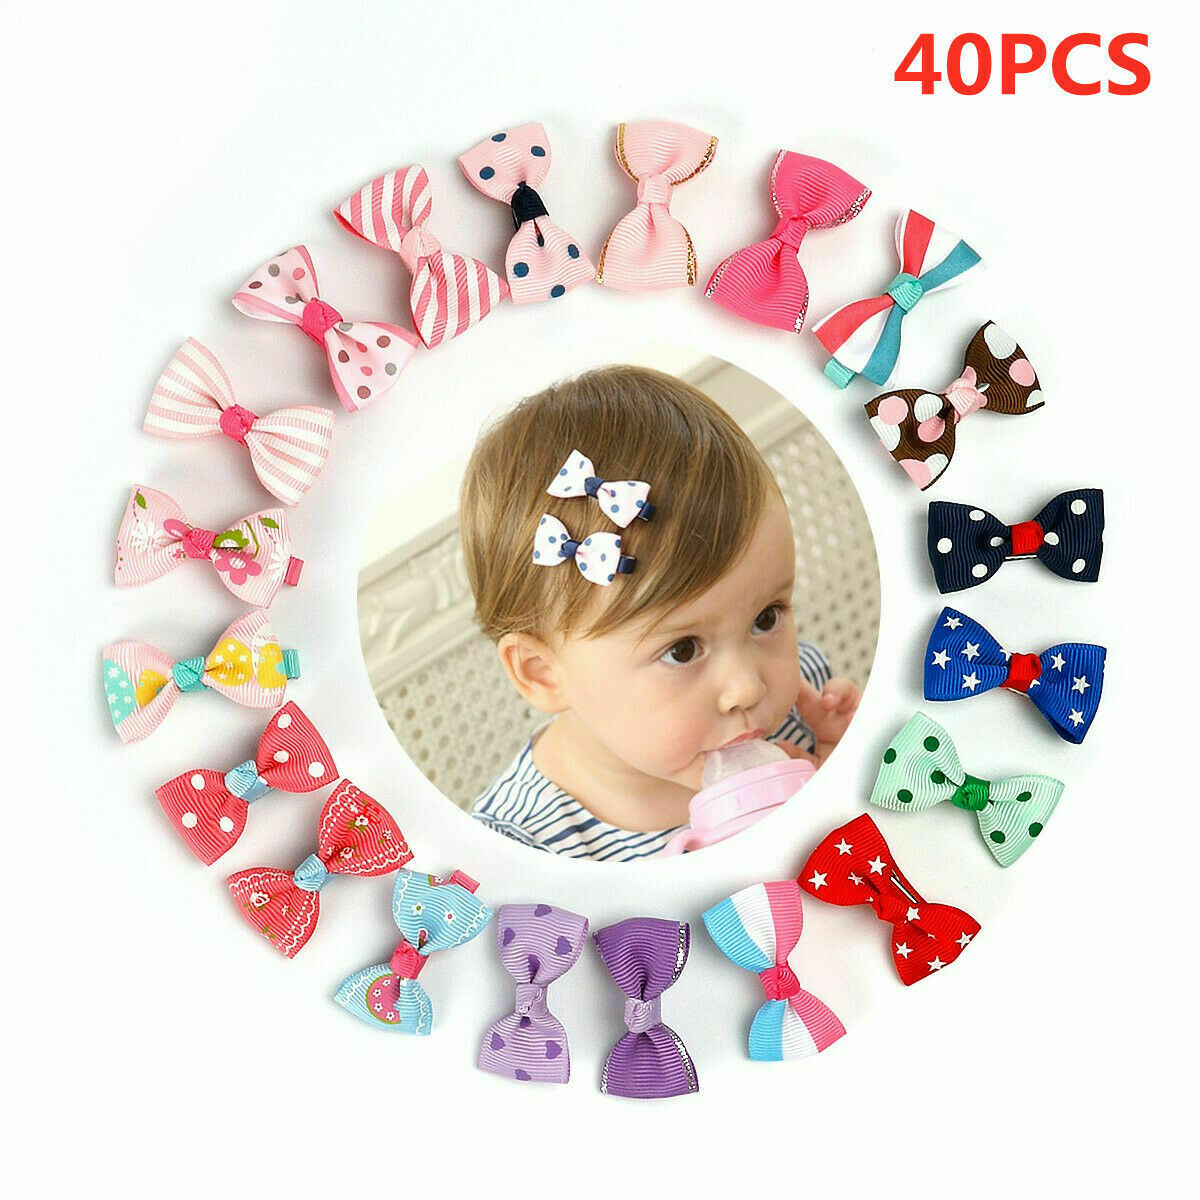 40pcs Baby Girls Kids Toddler Mini Flowers Bow Hair Clips Hairpin Accessories US